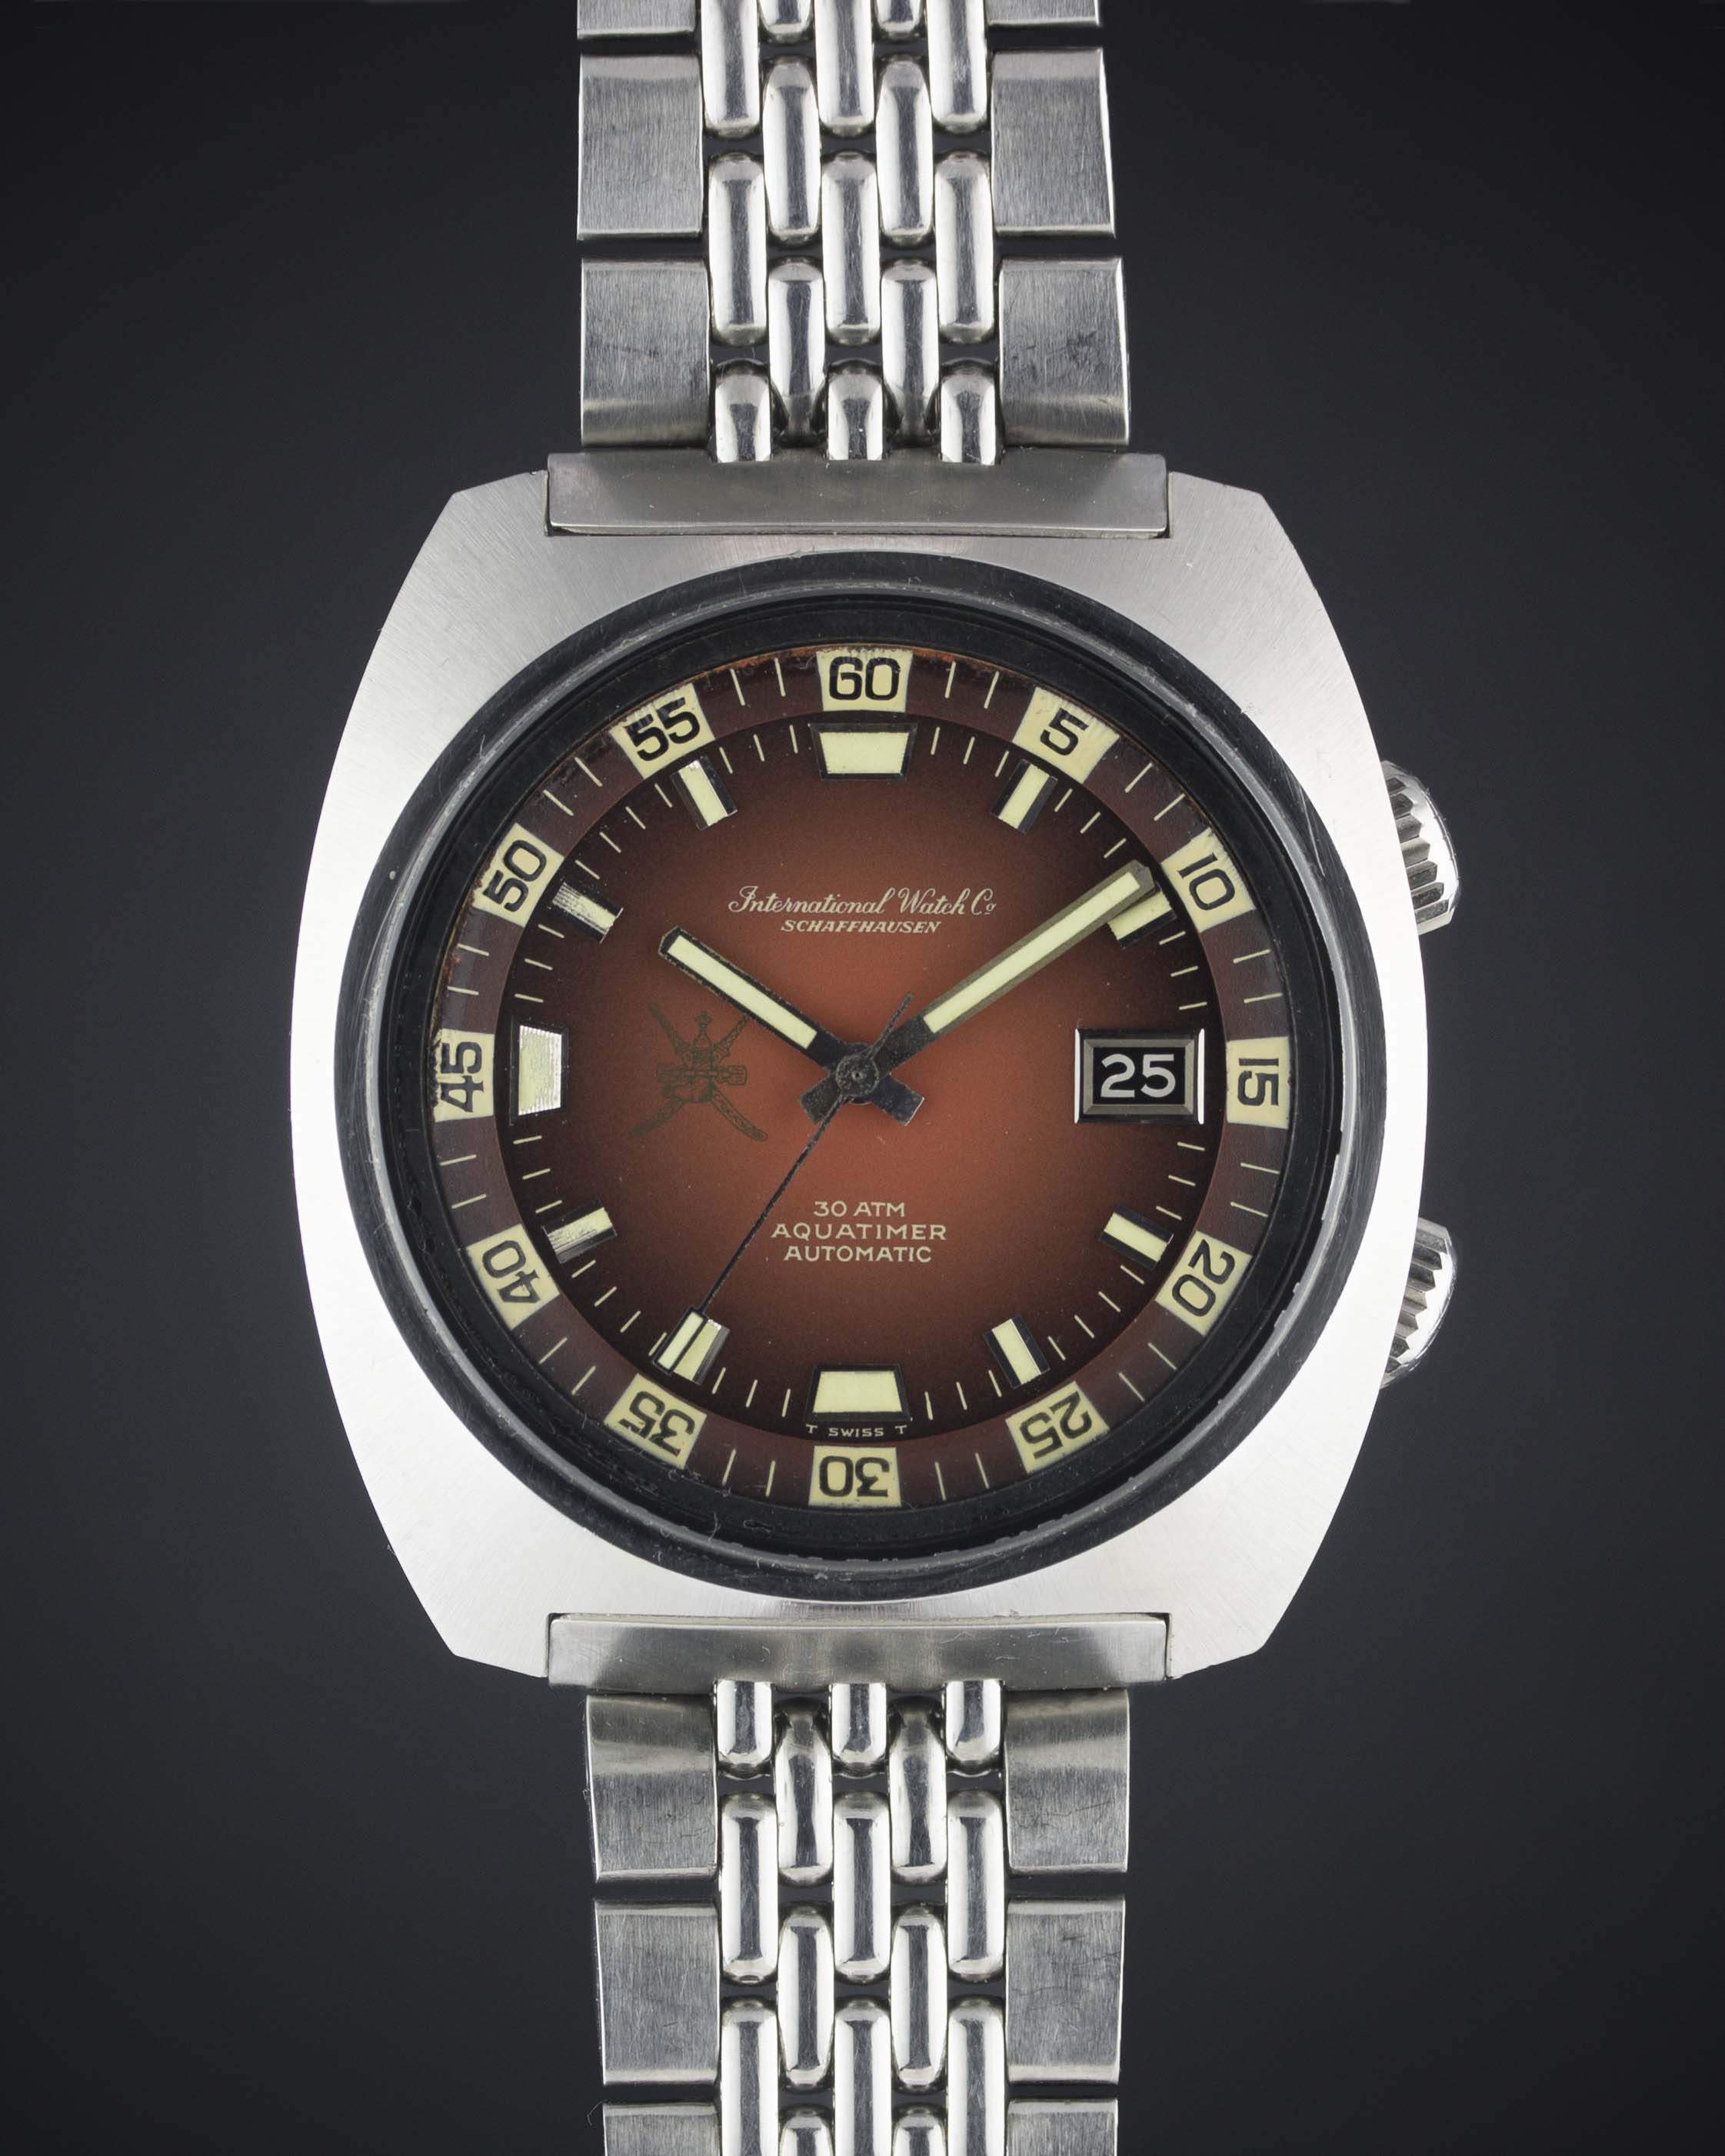 A VERY RARE GENTLEMAN'S STAINLESS STEEL IWC AQUATIMER 30ATM AUTOMATIC DIVERS BRACELET WATCH CIRCA - Image 2 of 2